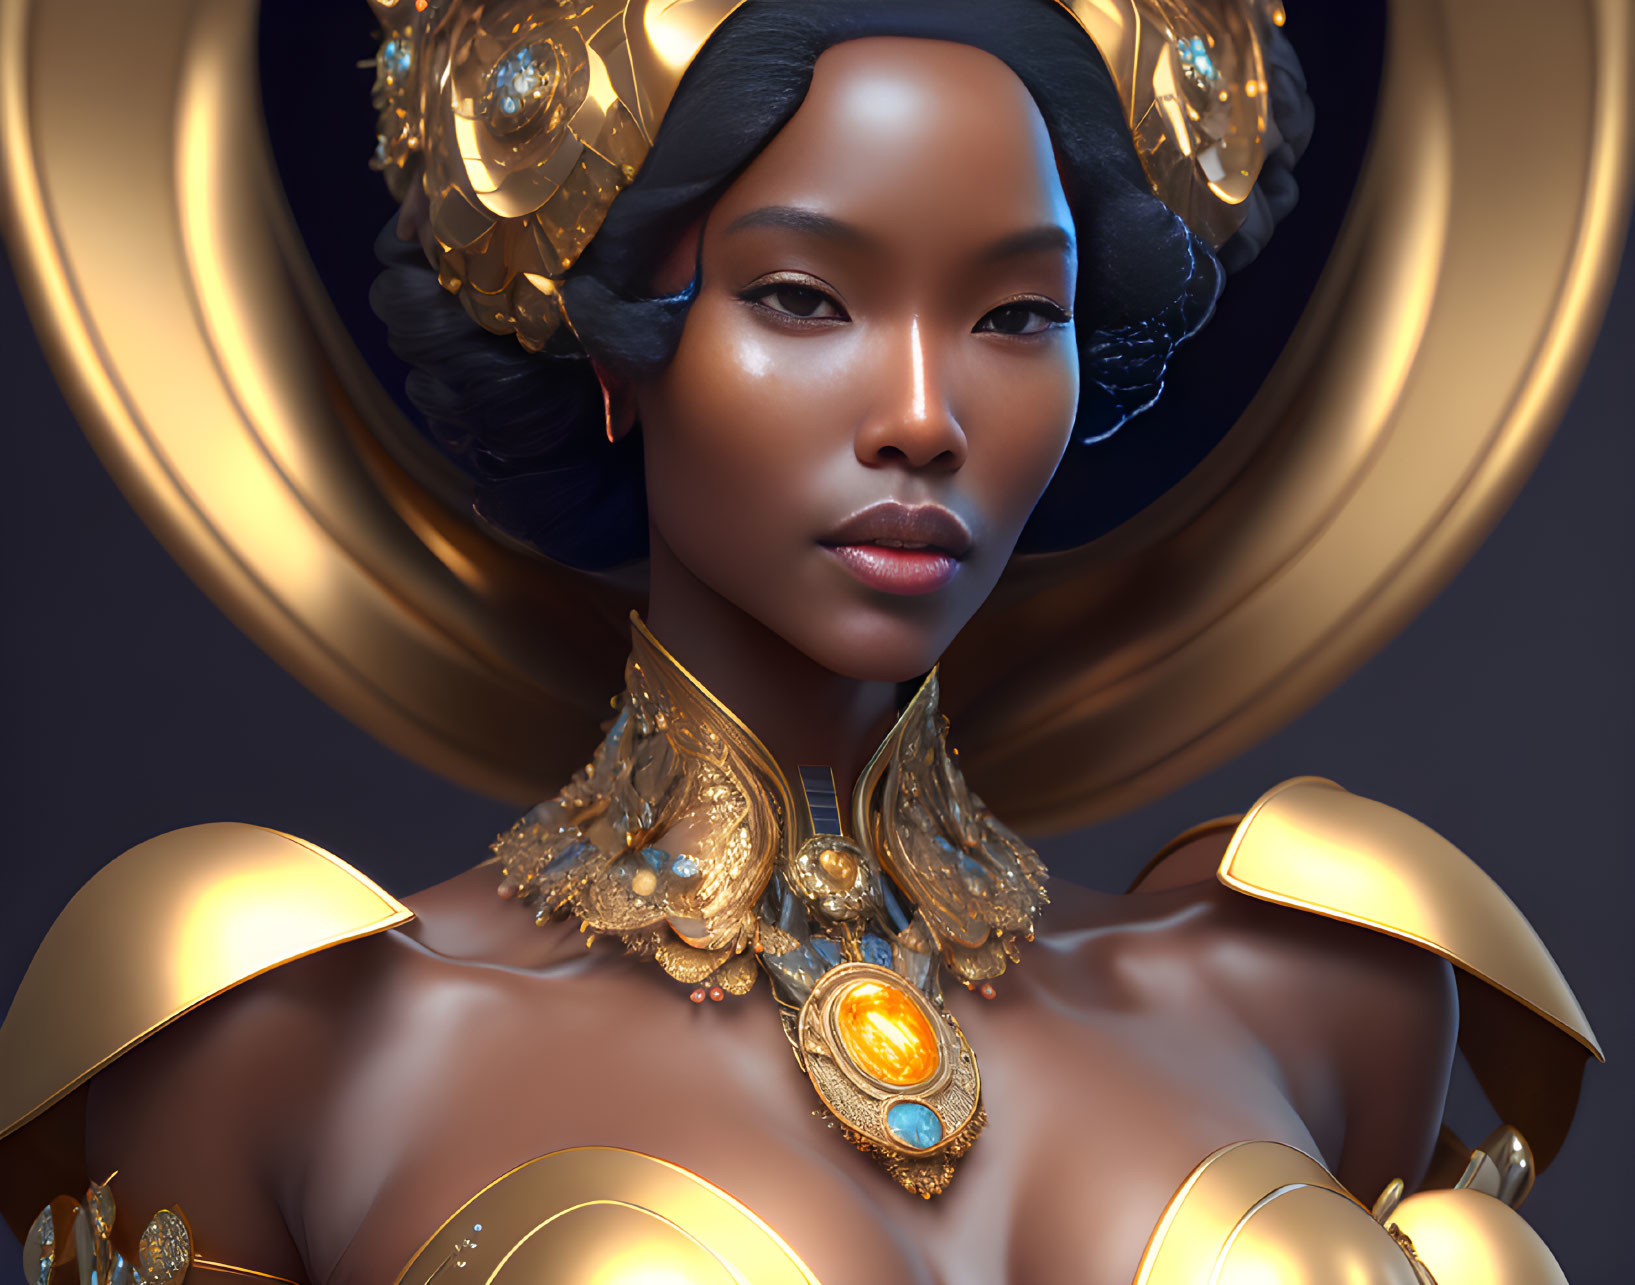 Dark-skinned woman in 3D rendering with gold jewelry and ornate headpiece